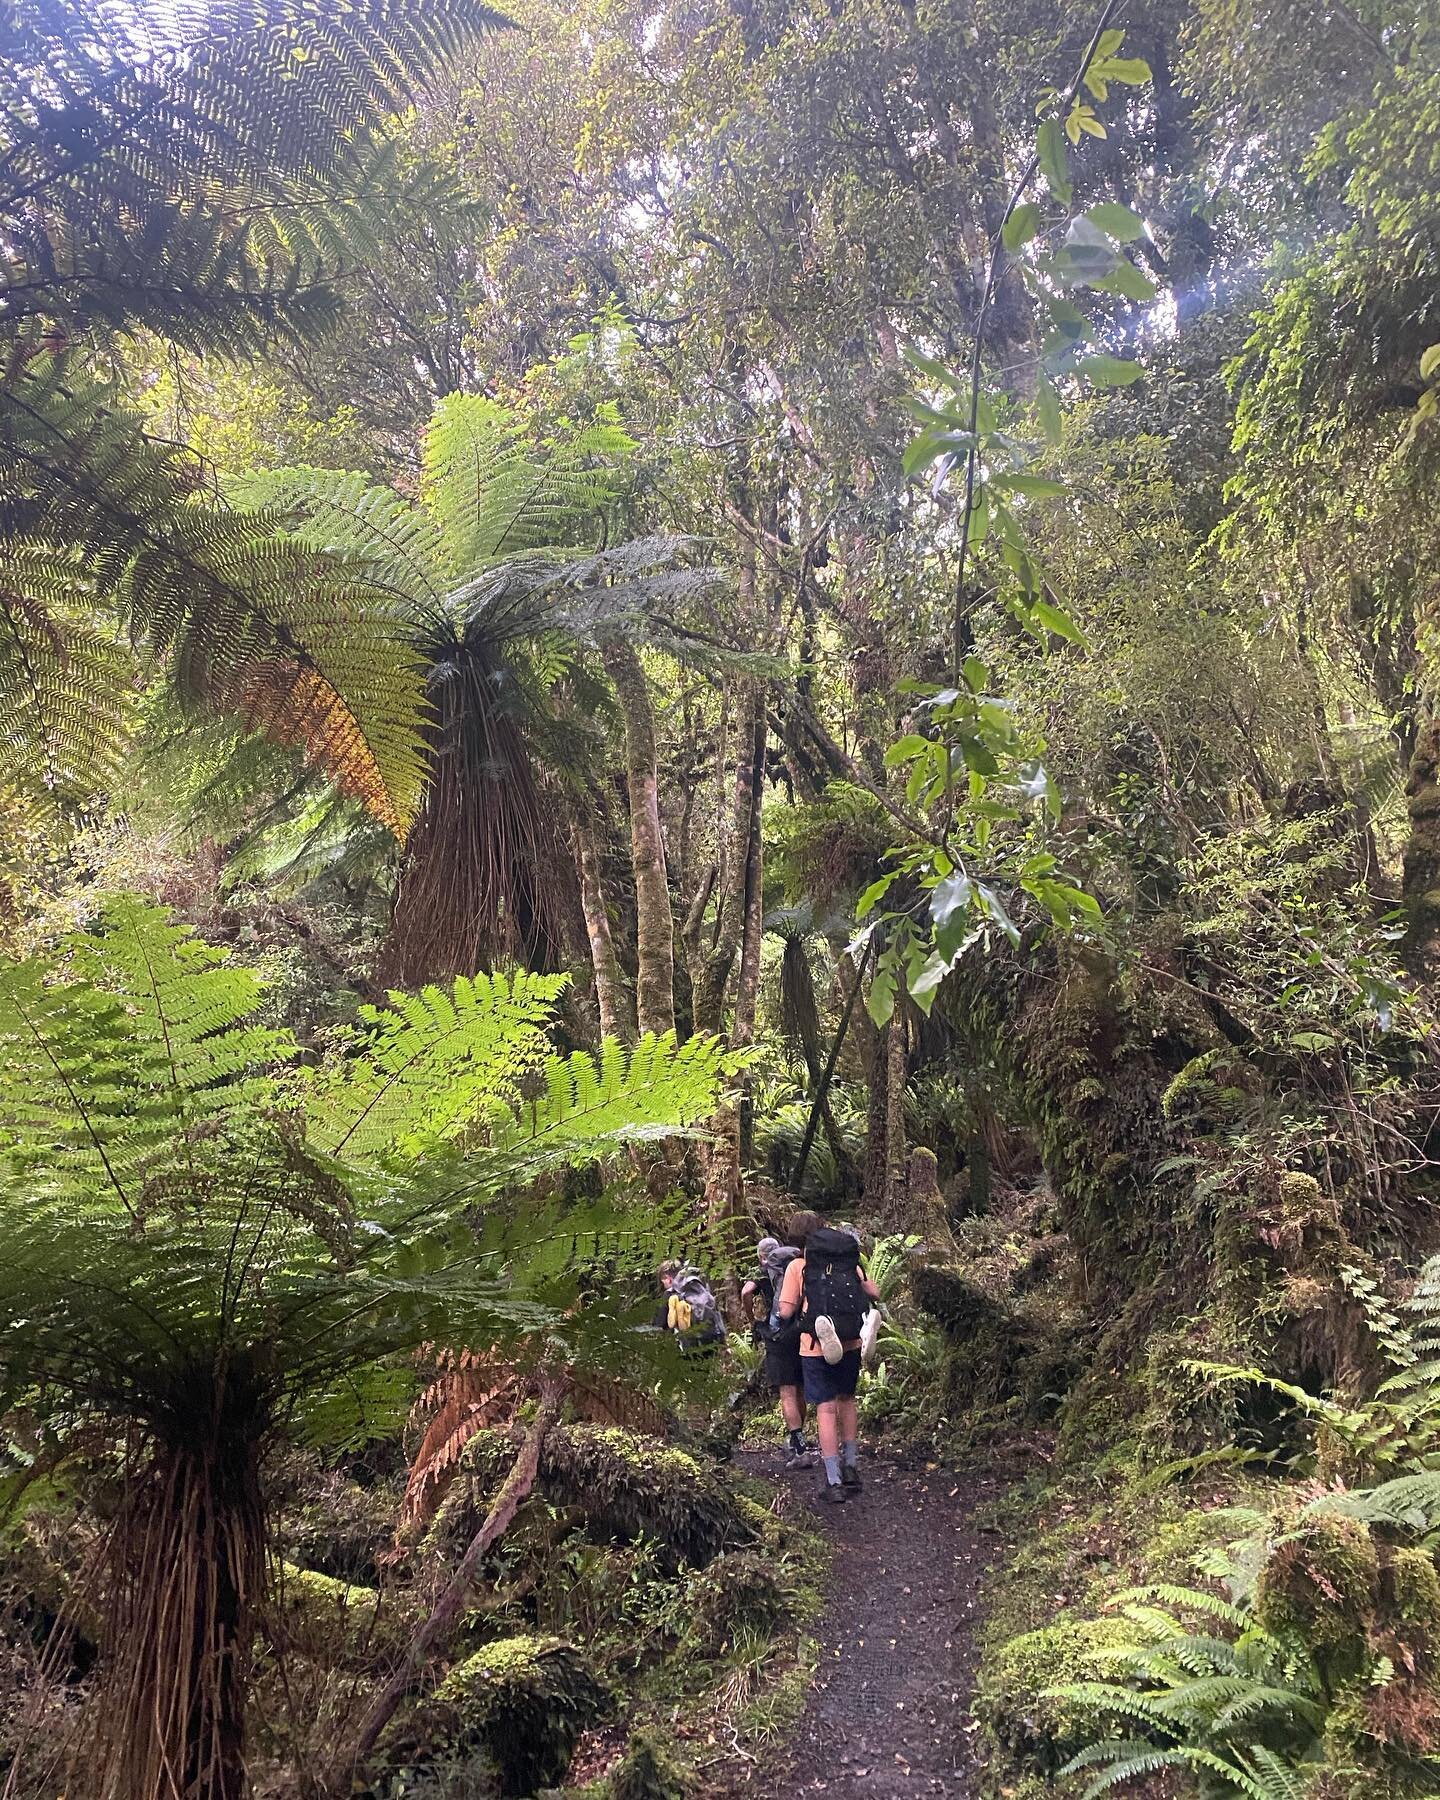 Stewart Island/Rakiura you were magic, and muddy. What an amazing place. Thank you to my family for indulging me with my love of hiking. &hearts;️🦌🦜🦭